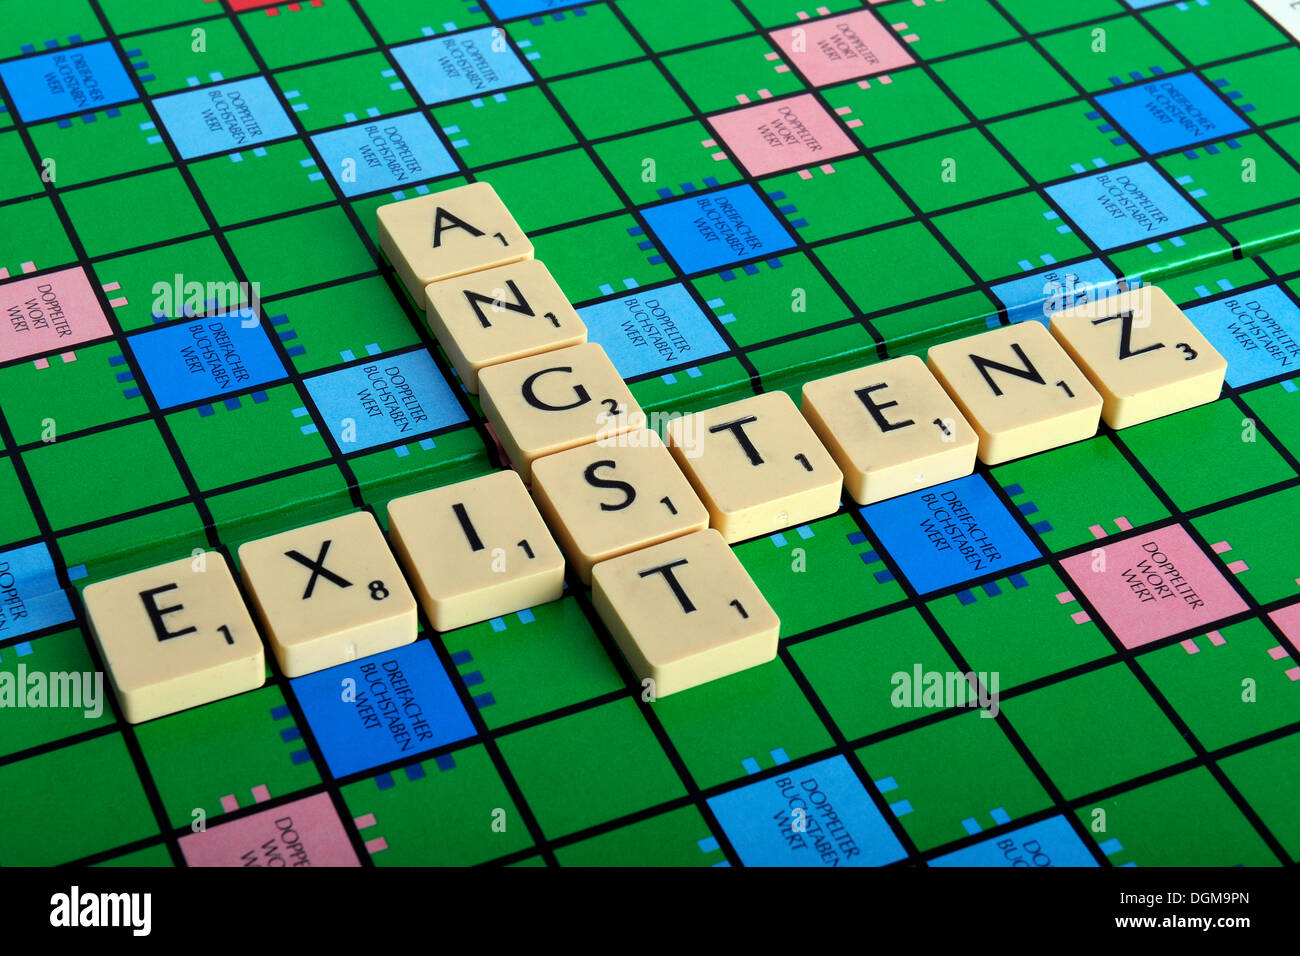 Scrabble letters forming the words Existenz and Angst, German for existential fear Stock Photo